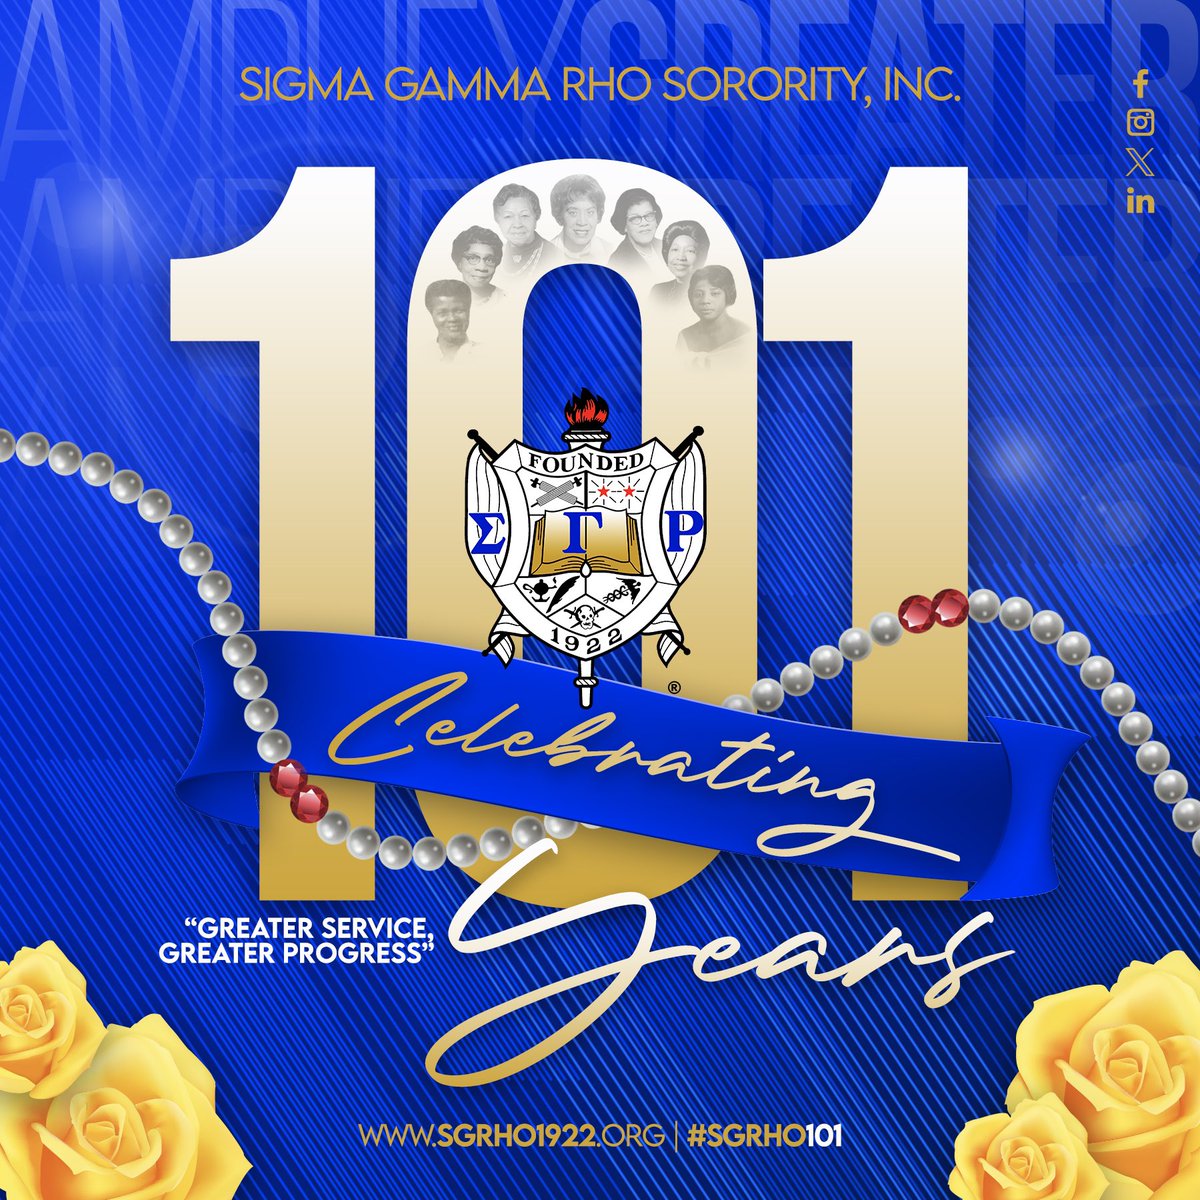 Happy 101st Founders' Day Sorors
 💙💛🐩 #SigmaGammaRho #FoundersDay #SGRho101 #GreaterWomenGreaterWorld #AmplifyGreater